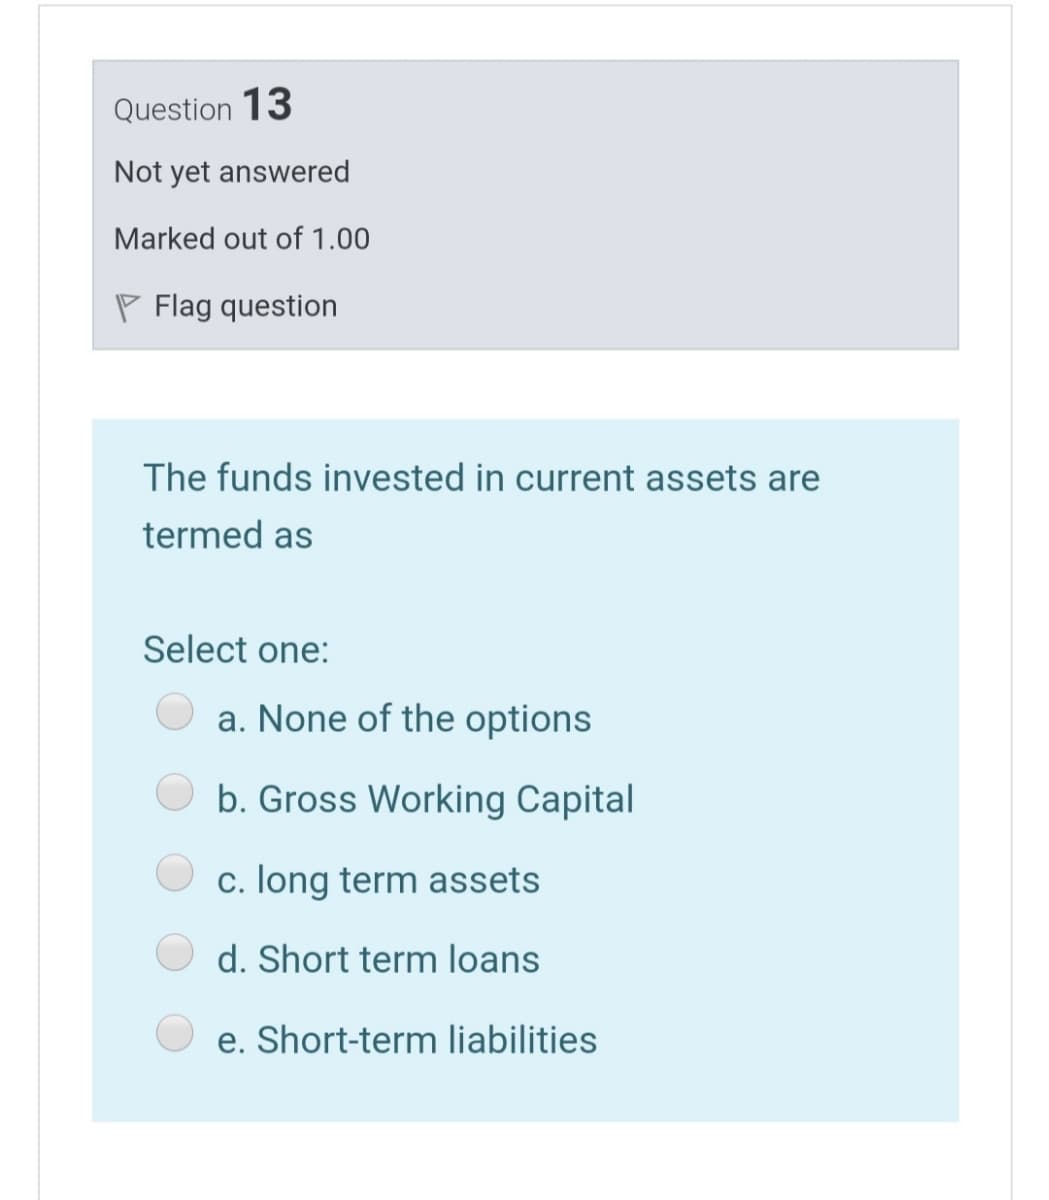 Question 13
Not yet answered
Marked out of 1.00
P Flag question
The funds invested in current assets are
termed as
Select one:
a. None of the options
b. Gross Working Capital
c. long term assets
d. Short term loans
e. Short-term liabilities
